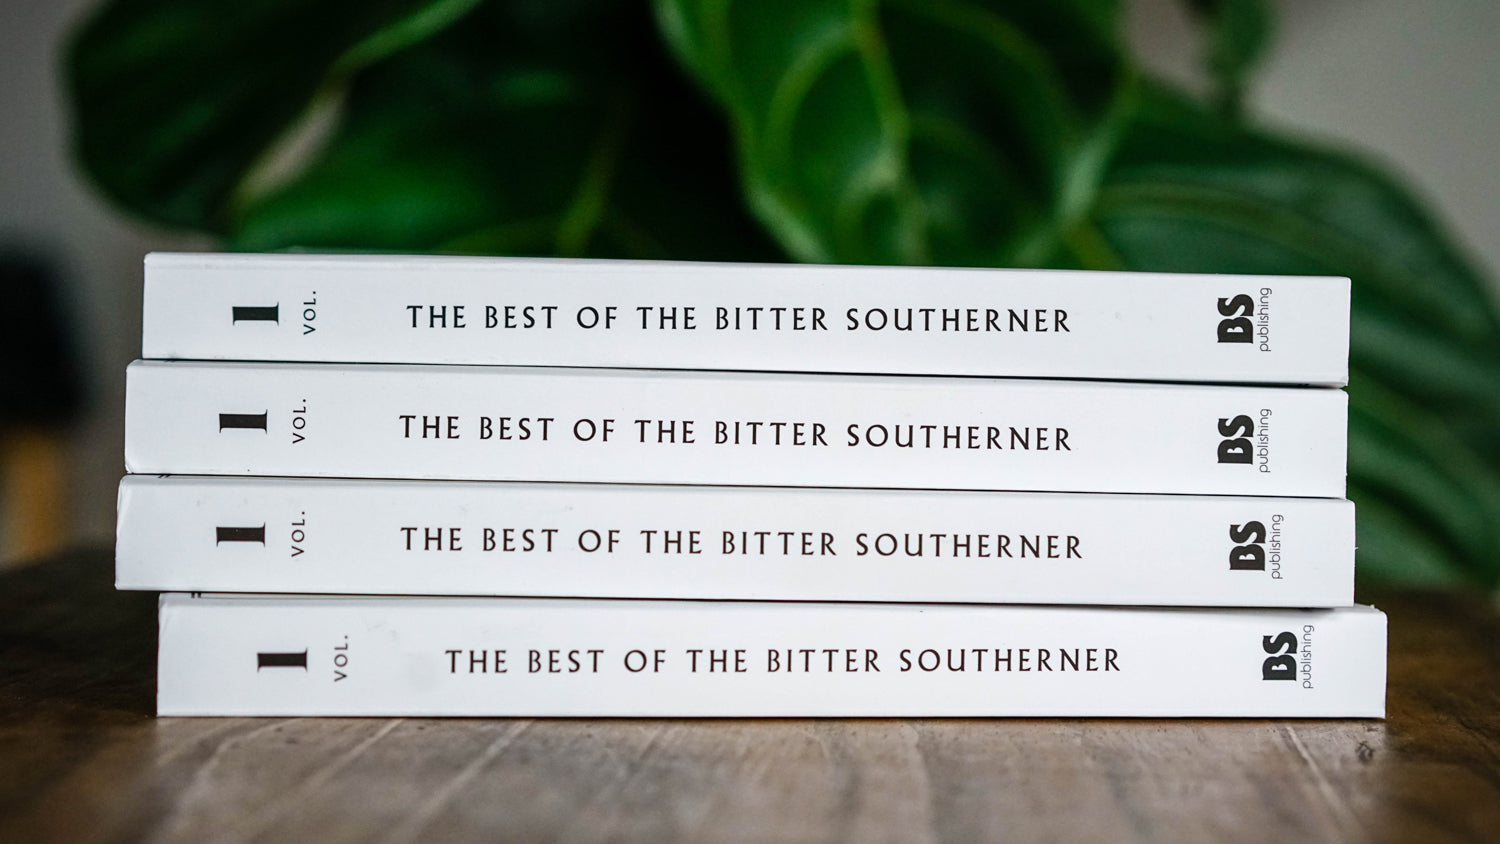 The Down and Dirty, from The Bitter Southerner — THE BITTER SOUTHERNER